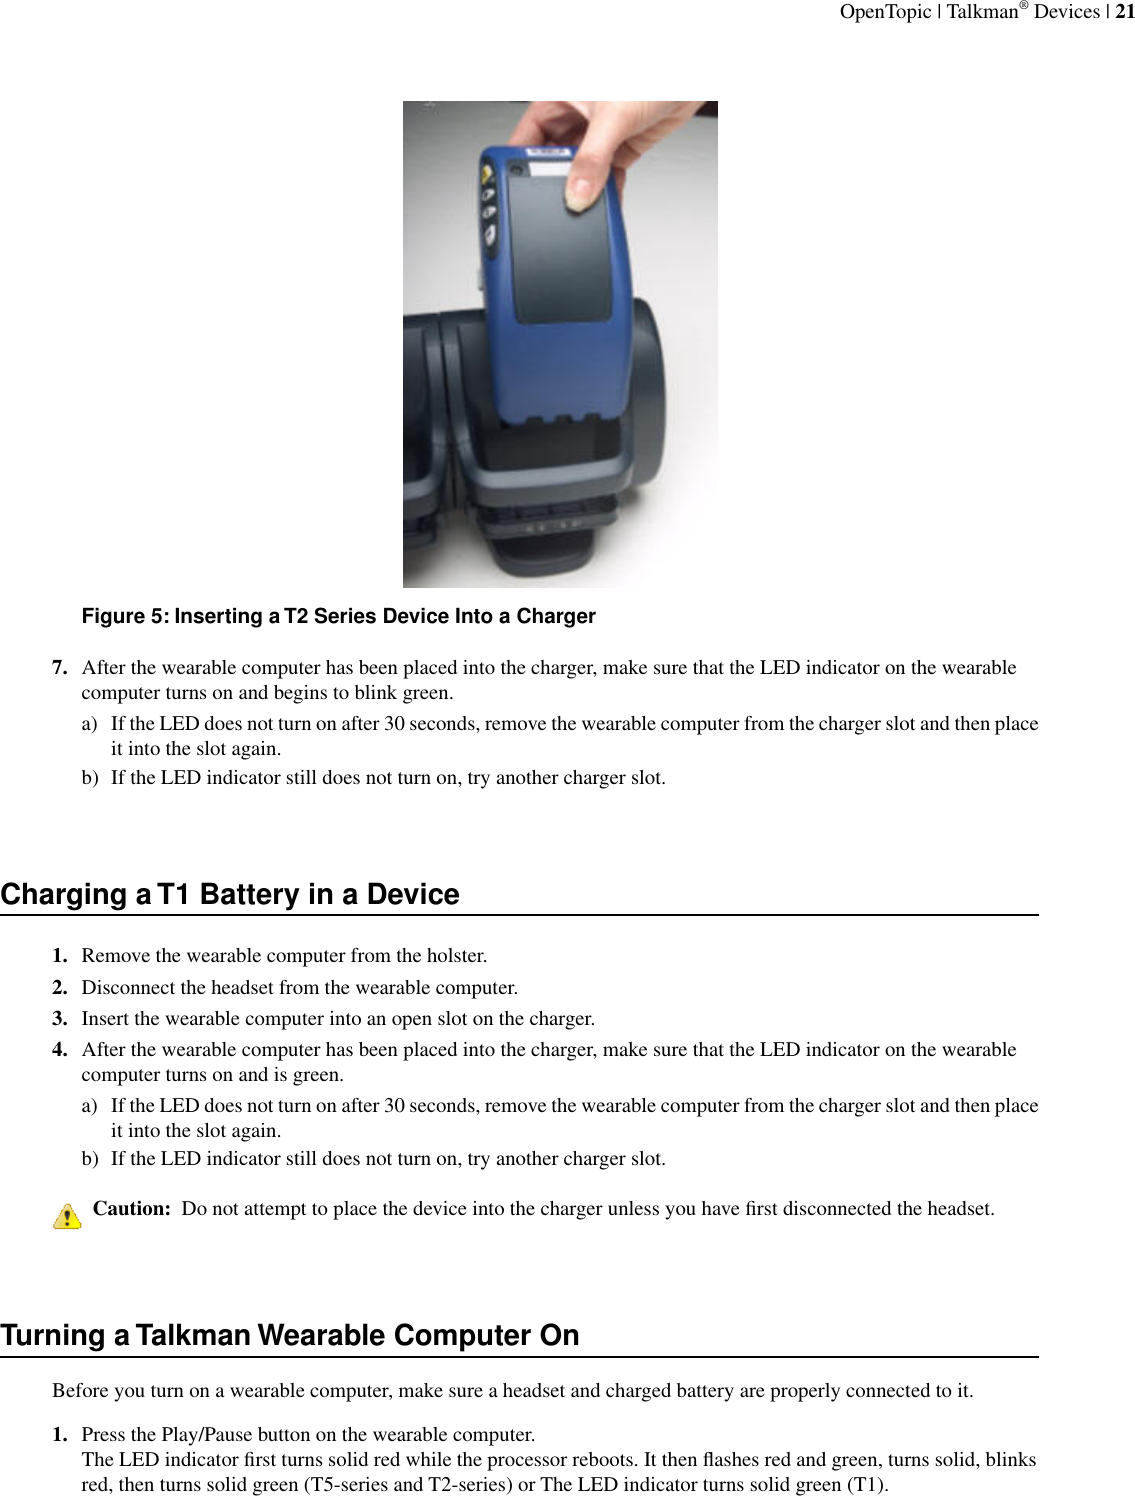 Figure 5: Inserting a T2 Series Device Into a Charger7. After the wearable computer has been placed into the charger, make sure that the LED indicator on the wearablecomputer turns on and begins to blink green.a) If the LED does not turn on after 30 seconds, remove the wearable computer from the charger slot and then placeit into the slot again.b) If the LED indicator still does not turn on, try another charger slot.Charging a T1 Battery in a Device1. Remove the wearable computer from the holster.2. Disconnect the headset from the wearable computer.3. Insert the wearable computer into an open slot on the charger.4. After the wearable computer has been placed into the charger, make sure that the LED indicator on the wearablecomputer turns on and is green.a) If the LED does not turn on after 30 seconds, remove the wearable computer from the charger slot and then placeit into the slot again.b) If the LED indicator still does not turn on, try another charger slot.Caution:  Do not attempt to place the device into the charger unless you have ﬁrst disconnected the headset.Turning a Talkman Wearable Computer OnBefore you turn on a wearable computer, make sure a headset and charged battery are properly connected to it.1. Press the Play/Pause button on the wearable computer.The LED indicator ﬁrst turns solid red while the processor reboots. It then ﬂashes red and green, turns solid, blinksred, then turns solid green (T5-series and T2-series) or The LED indicator turns solid green (T1).OpenTopic | Talkman® Devices | 21